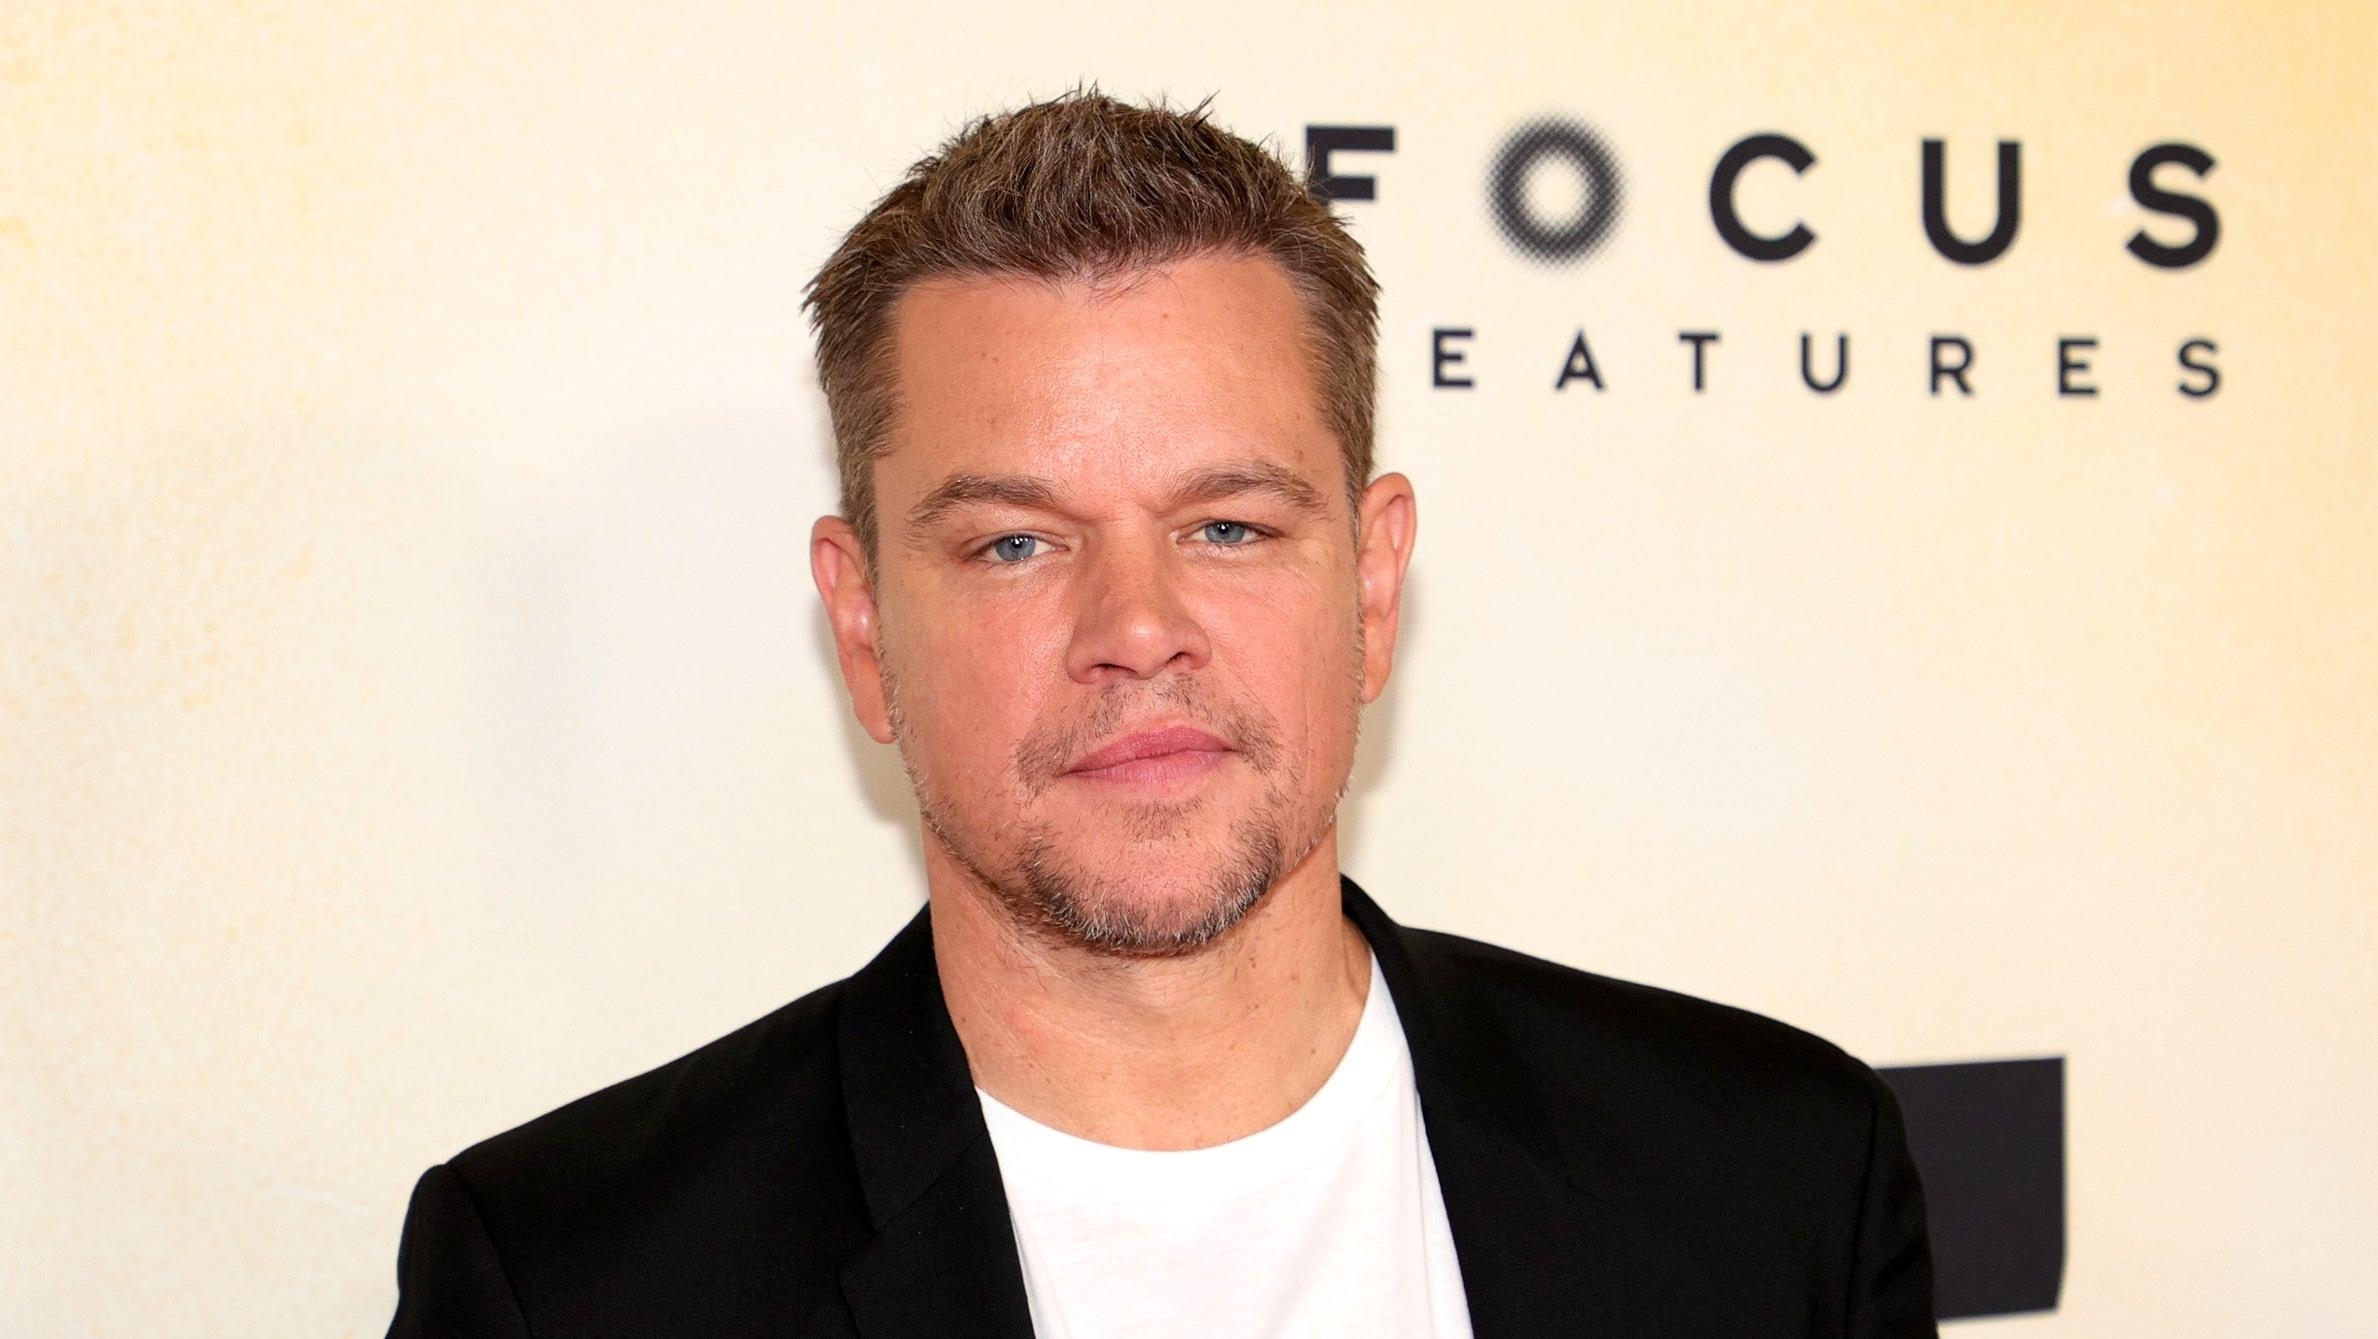 Matt Damon wants everyone to know that he never actually used the “F-slur” himself